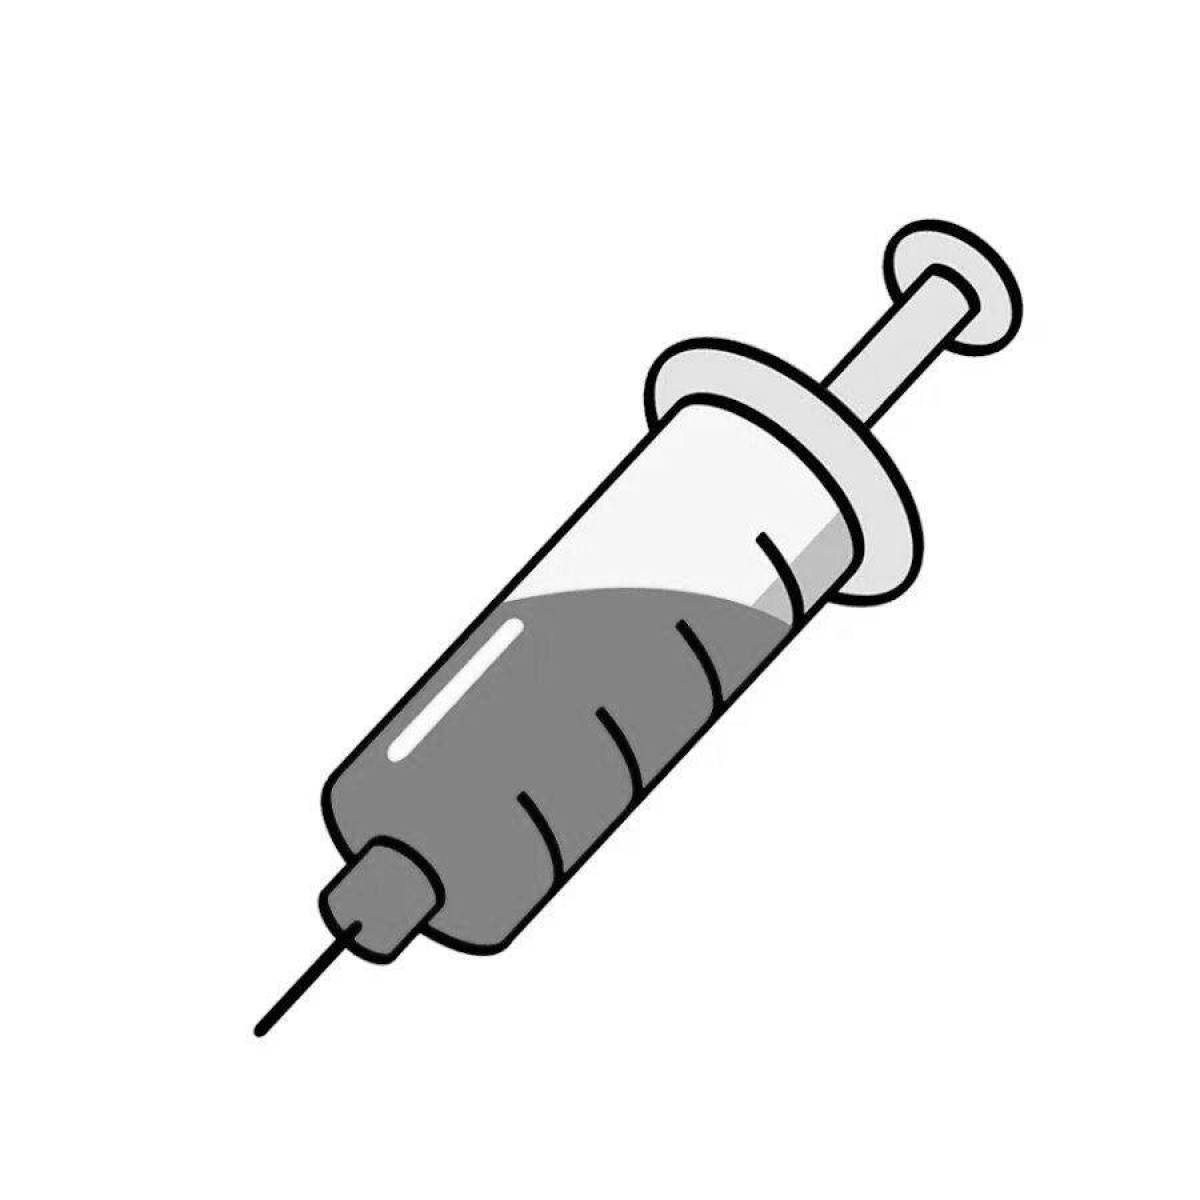 Coloring page friendly syringe with needle